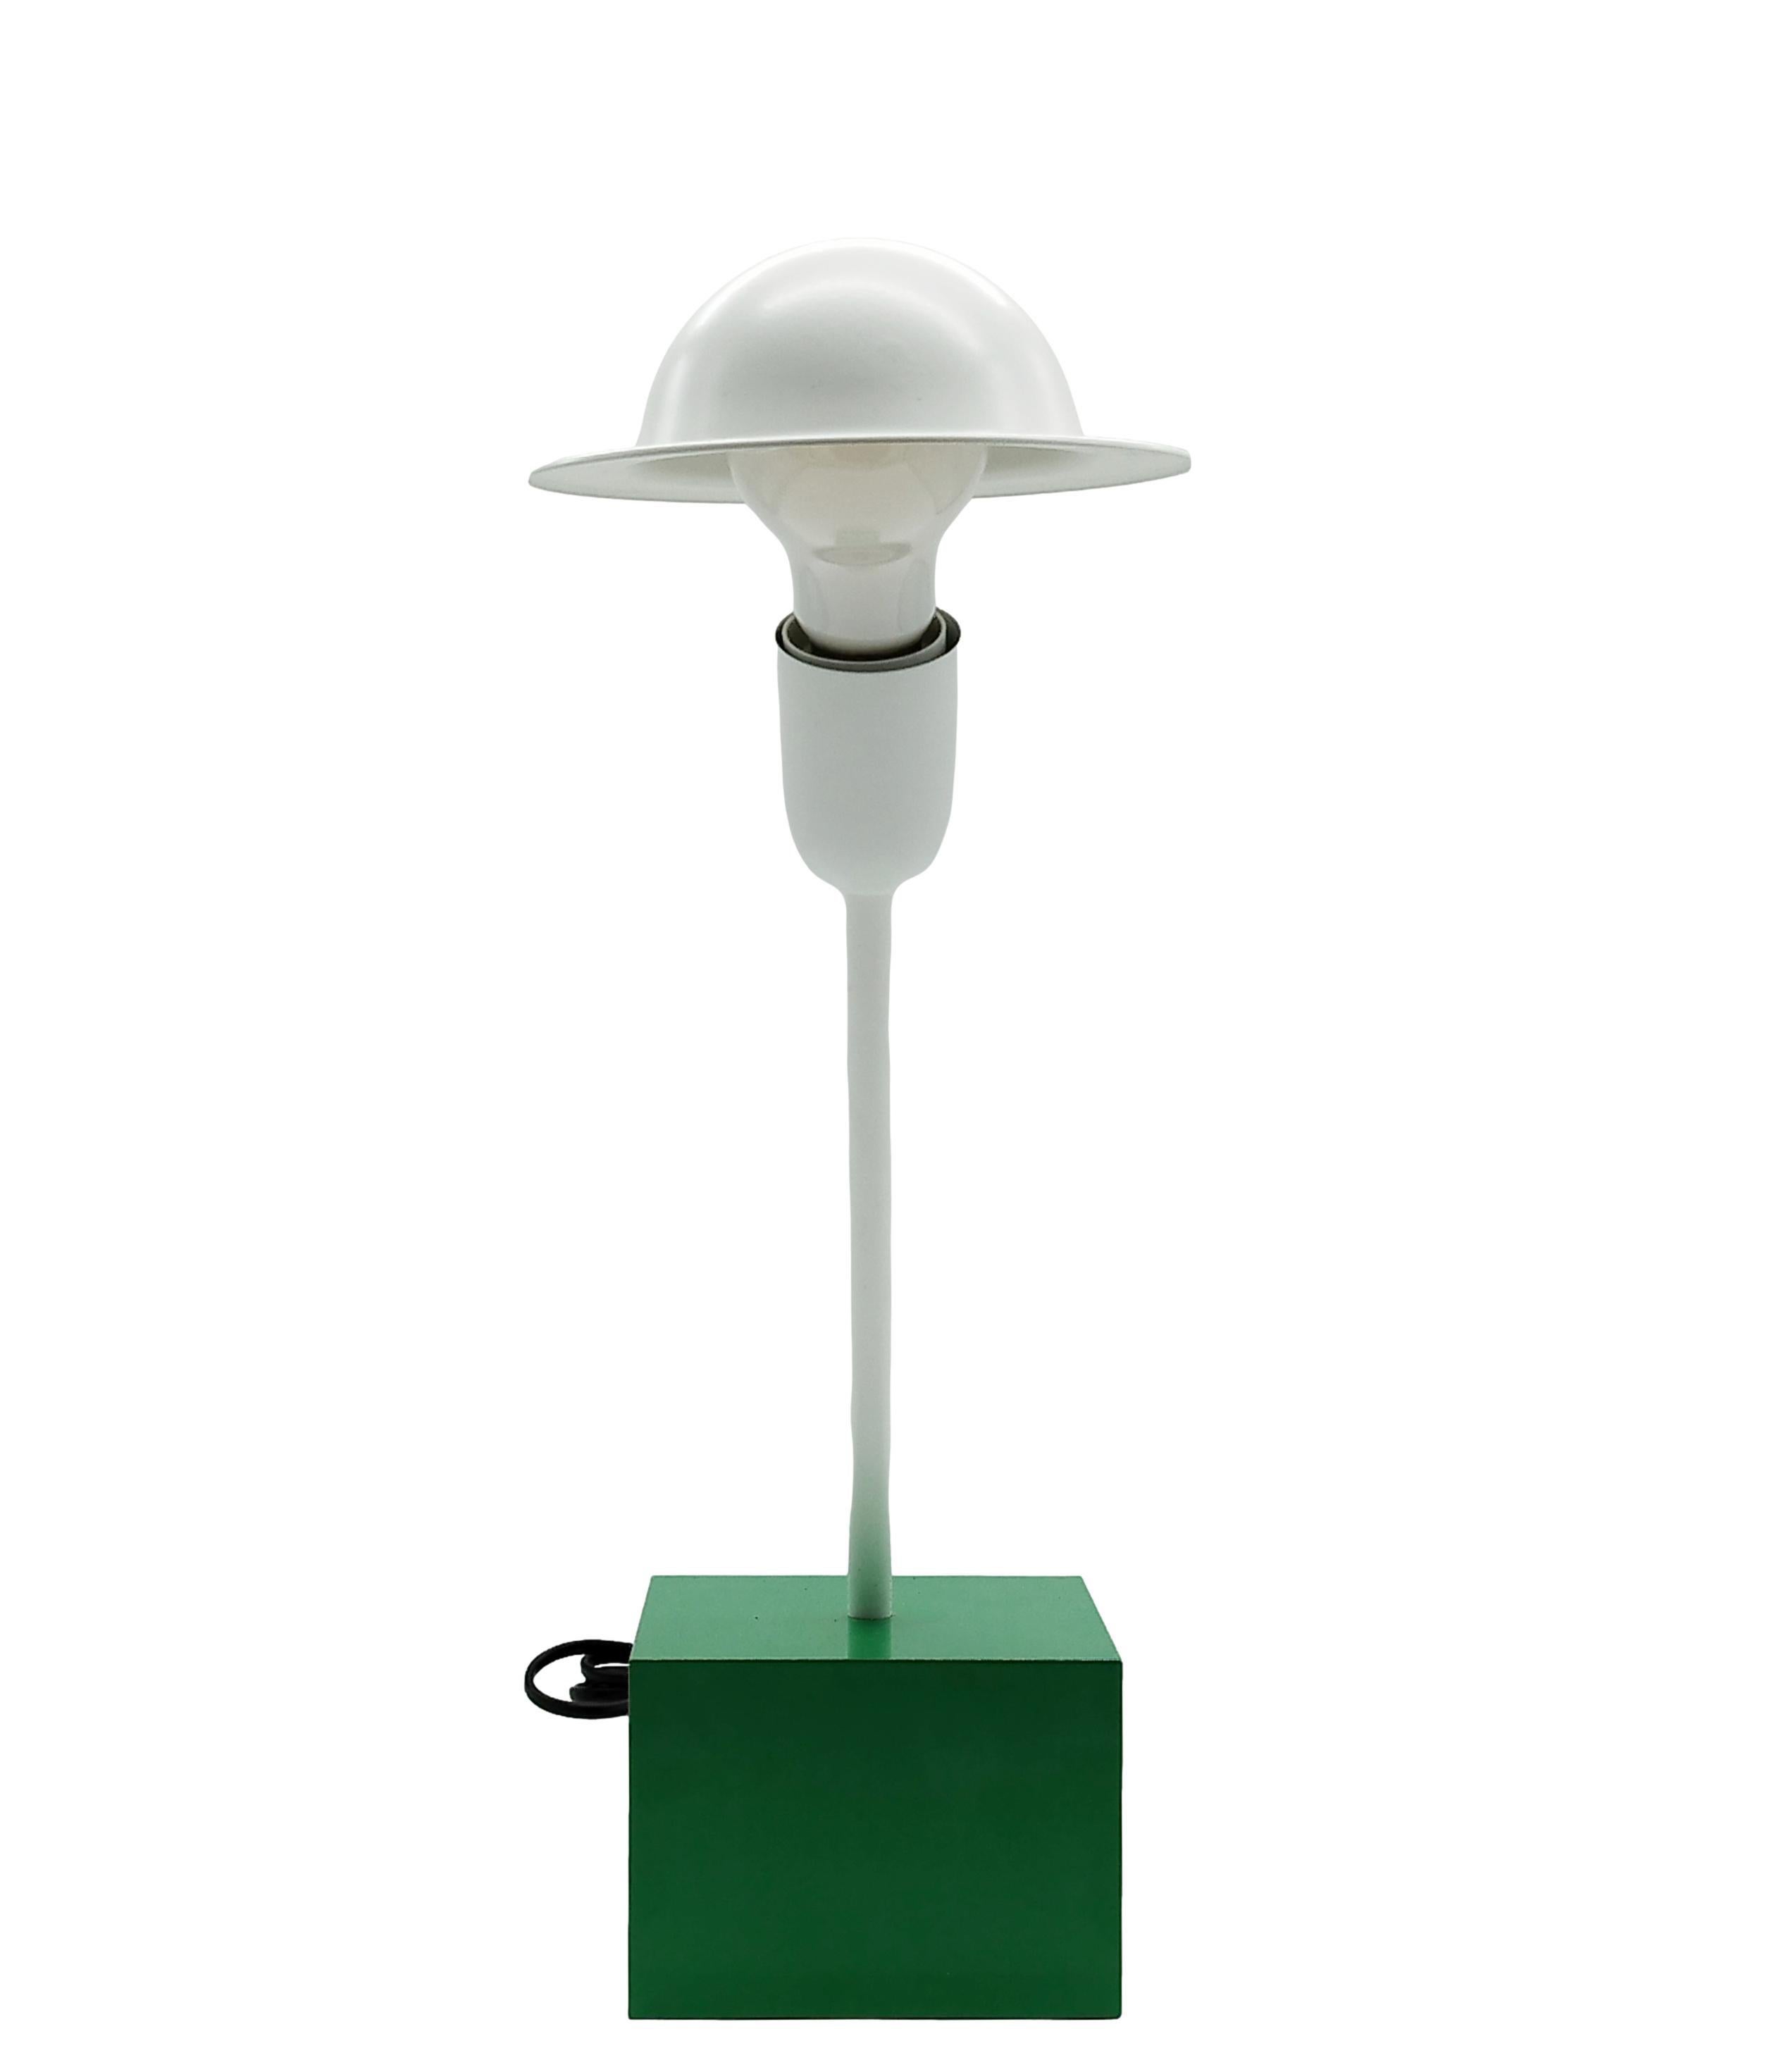 A Don table lamp designed by Ettore Sottsass in 1977. The lamp was manufactured by Stilnovo, Italy, and has a manufacturer’s label.
Consisting of a heavy cubical emerald green base with a white slanted rod and adjustable 'bowler hat' shade.
Ettore